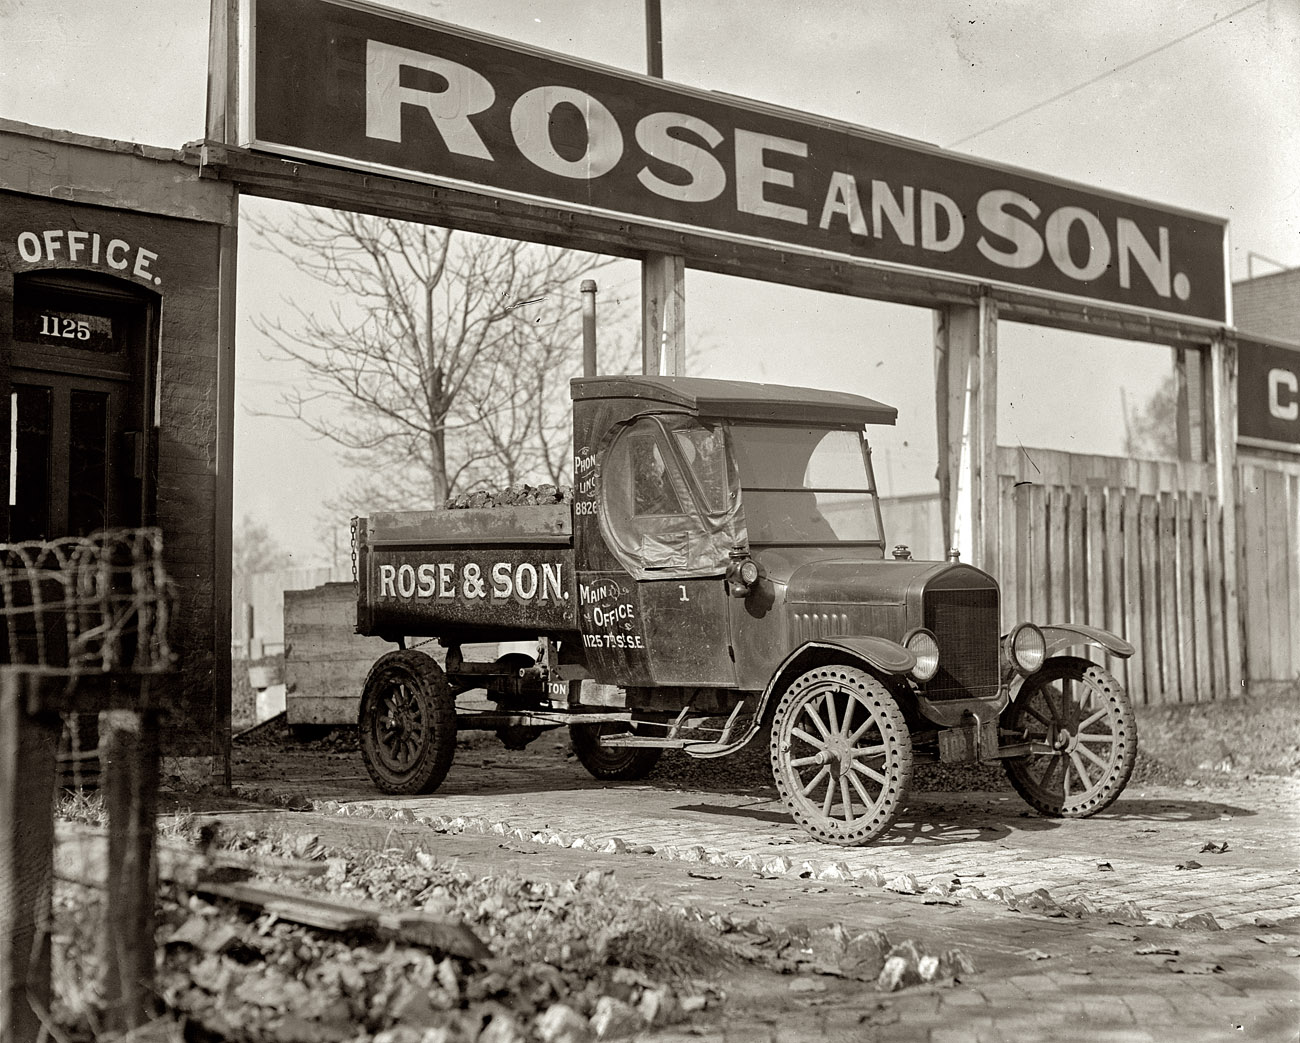 Washington, D.C., 1925. "Ford Motor Co." Delivery truck leaving the Rose & Son coalyard at 1125 Seventh Street S.E.  View full size. National Photo Company.